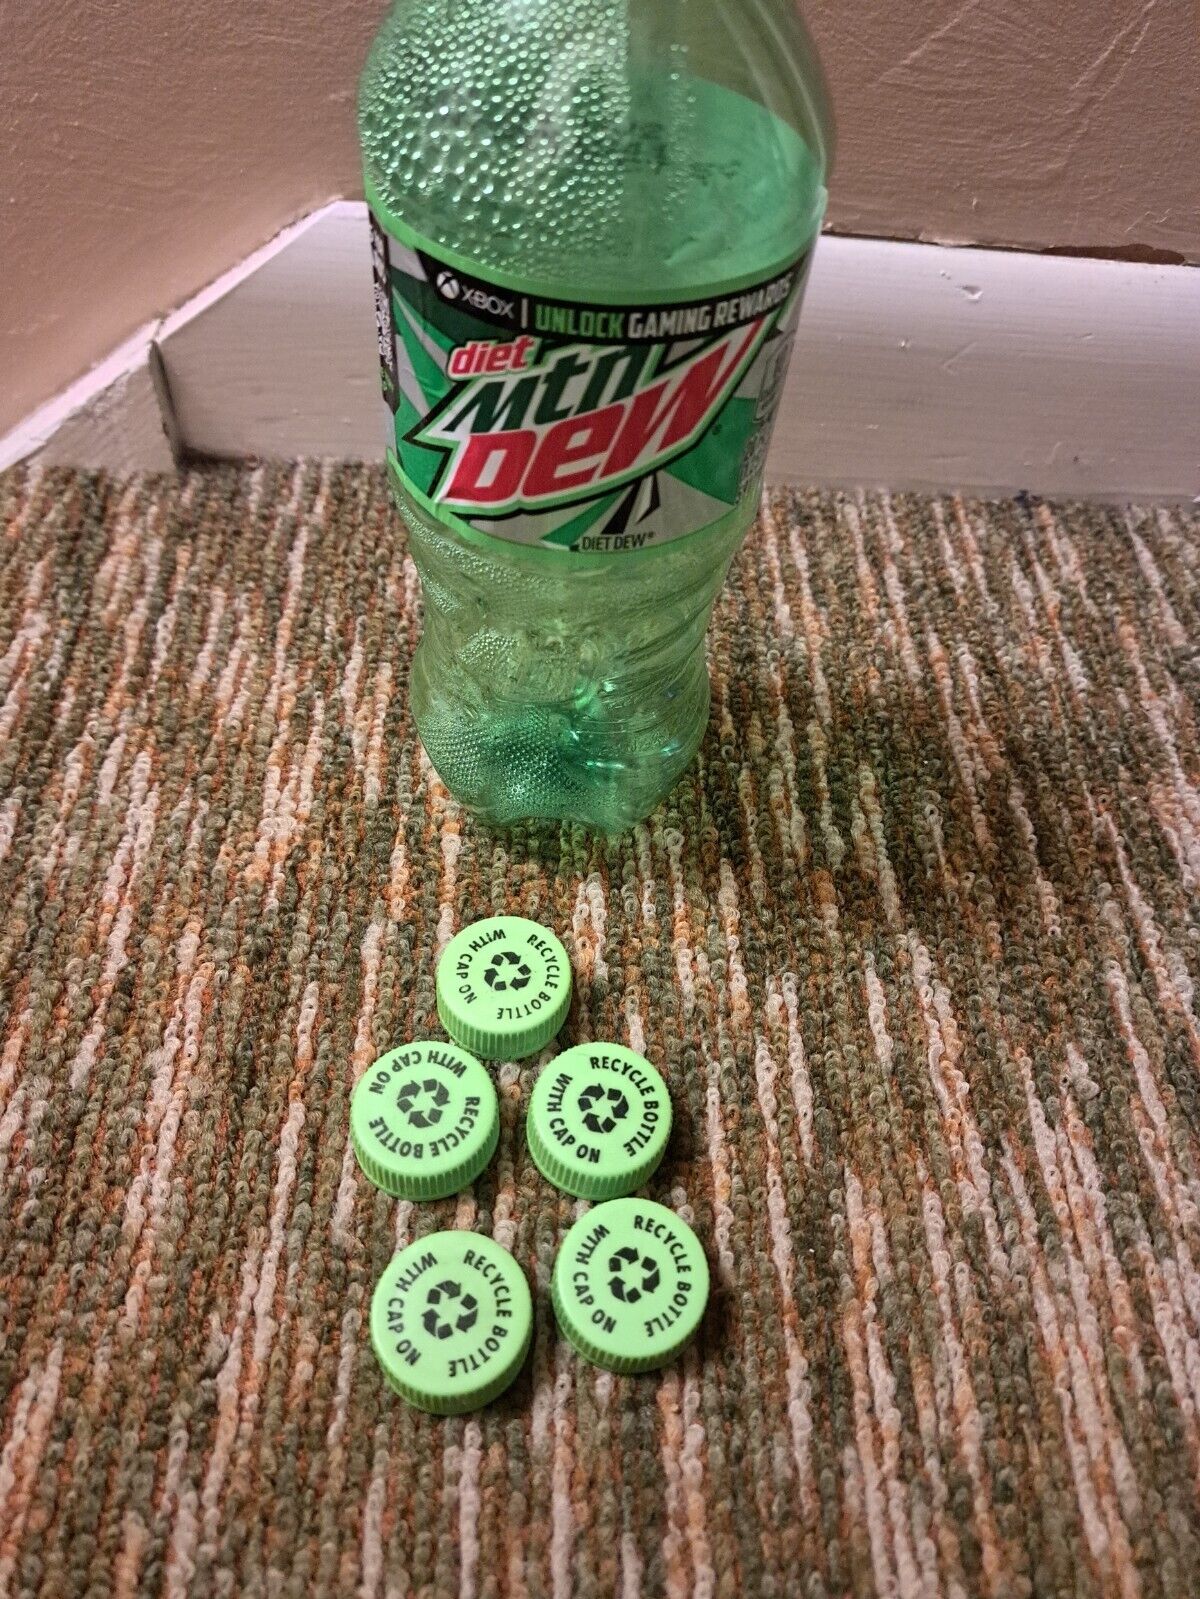 Five Moutain Dew XBOX Gaming Codes